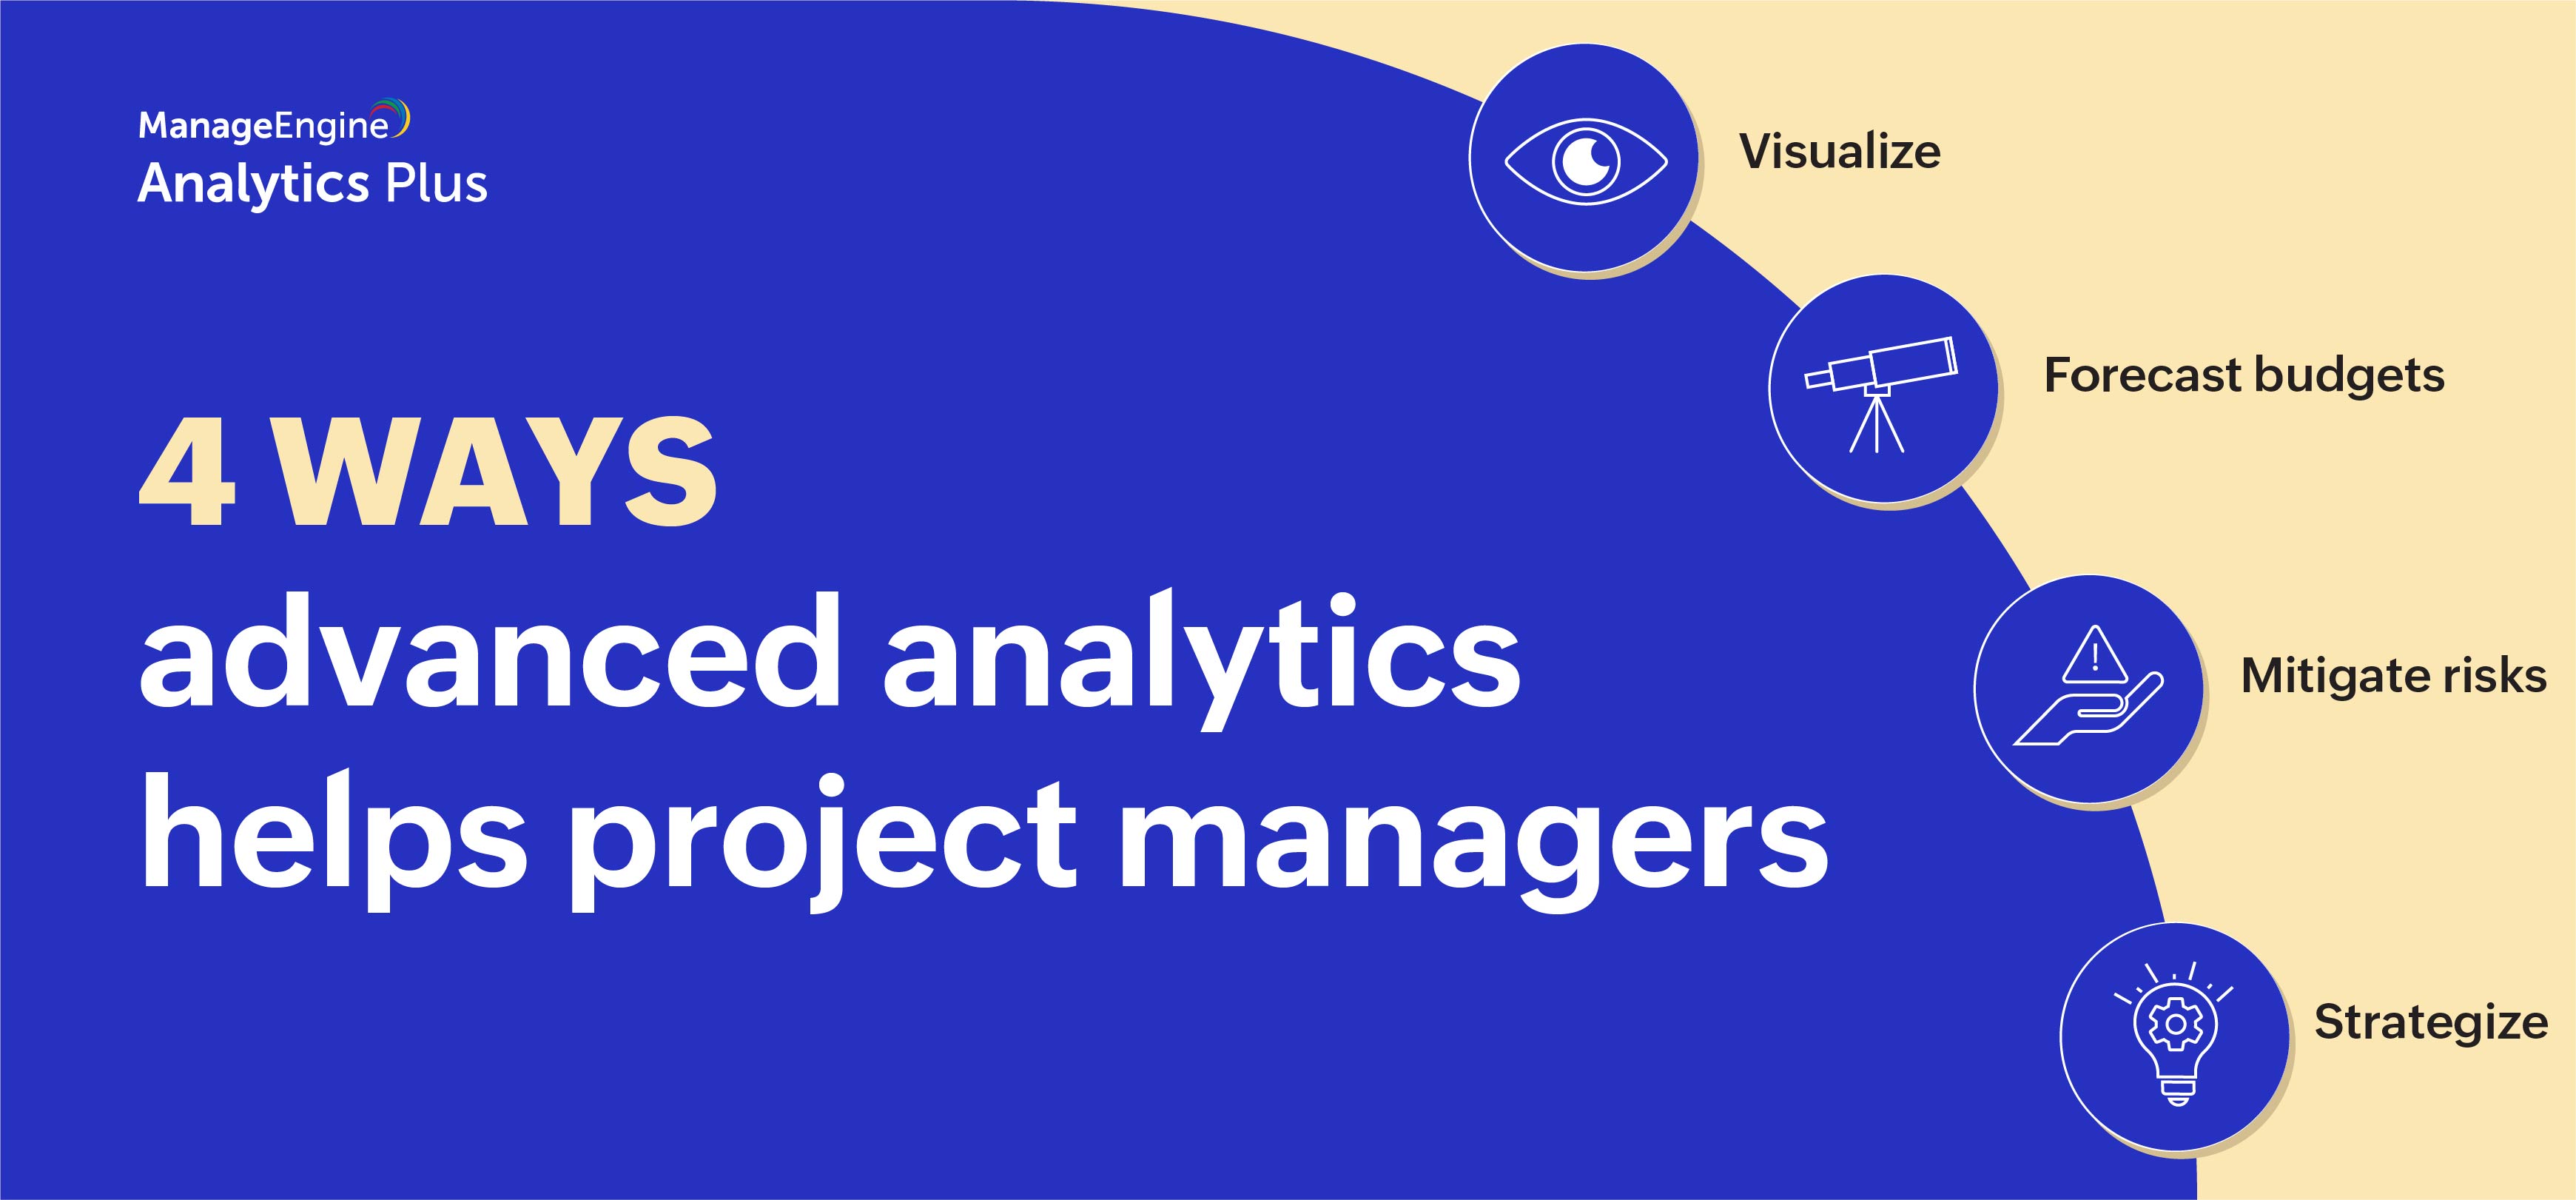 4 ways advanced analytics helps project managers